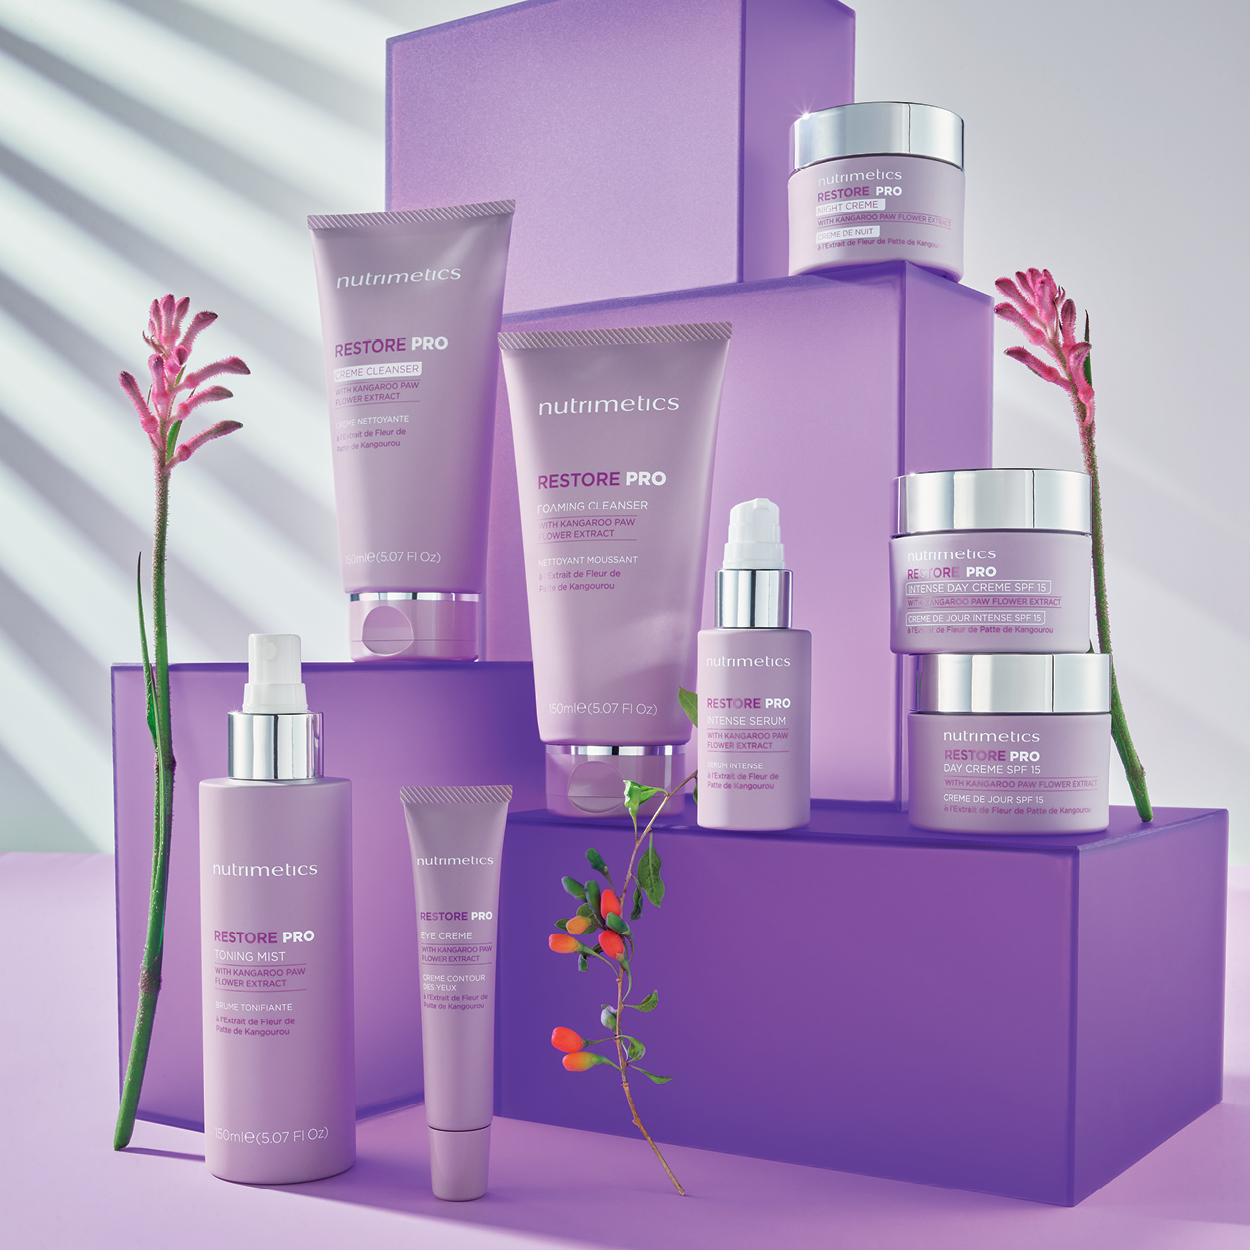 Restore PRO range for a healthy skin microbiome